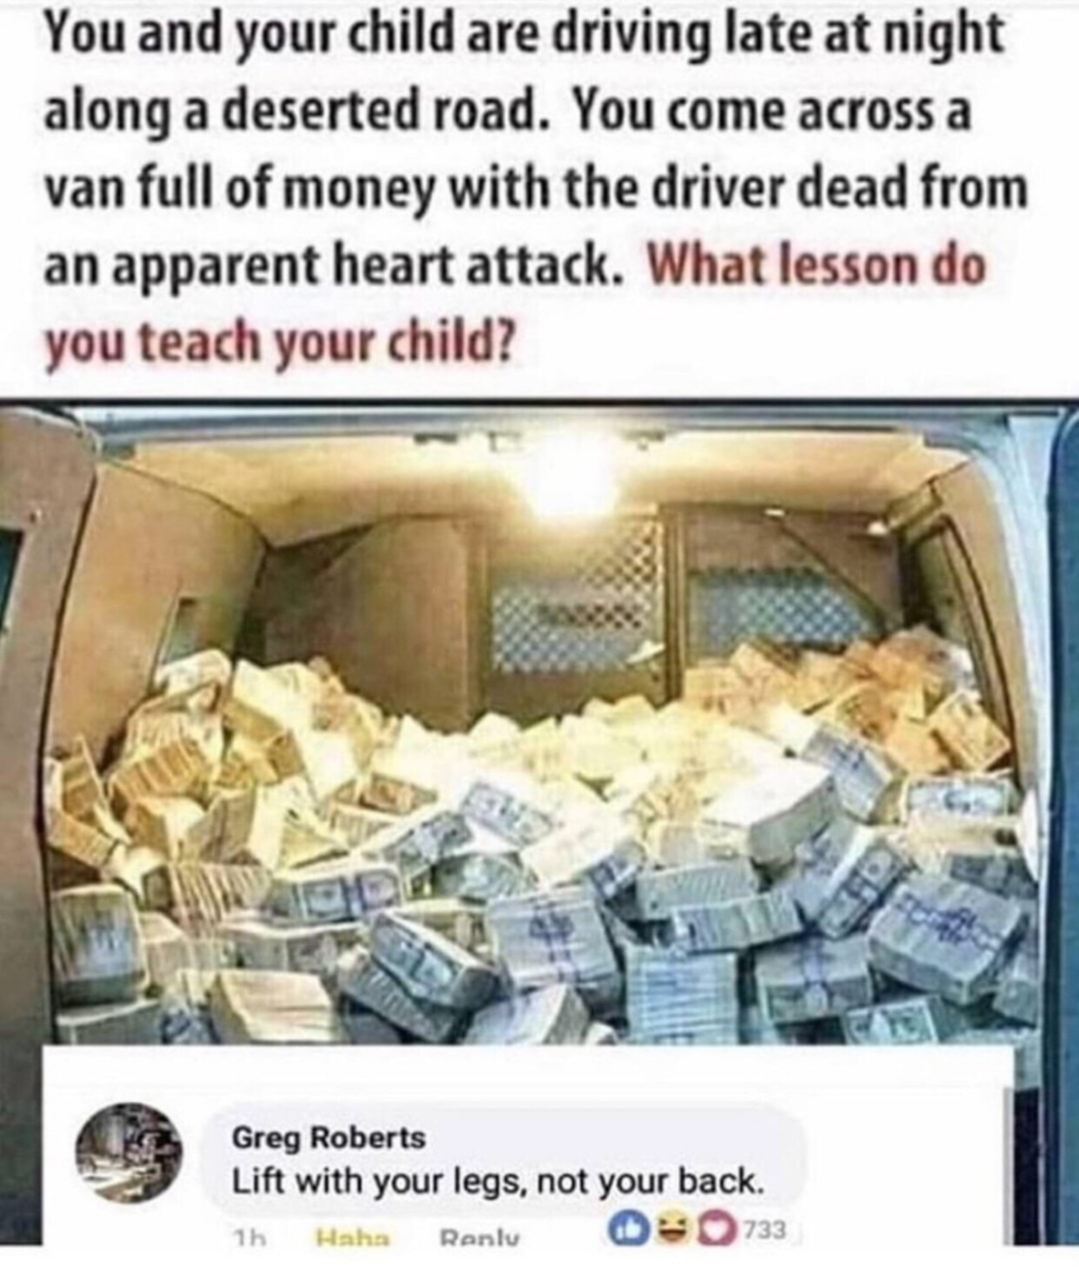 you and your child are driving late - You and your child are driving late at night along a deserted road. You come across a van full of money with the driver dead from an apparent heart attack. What lesson do you teach your child? Greg Roberts Lift with y